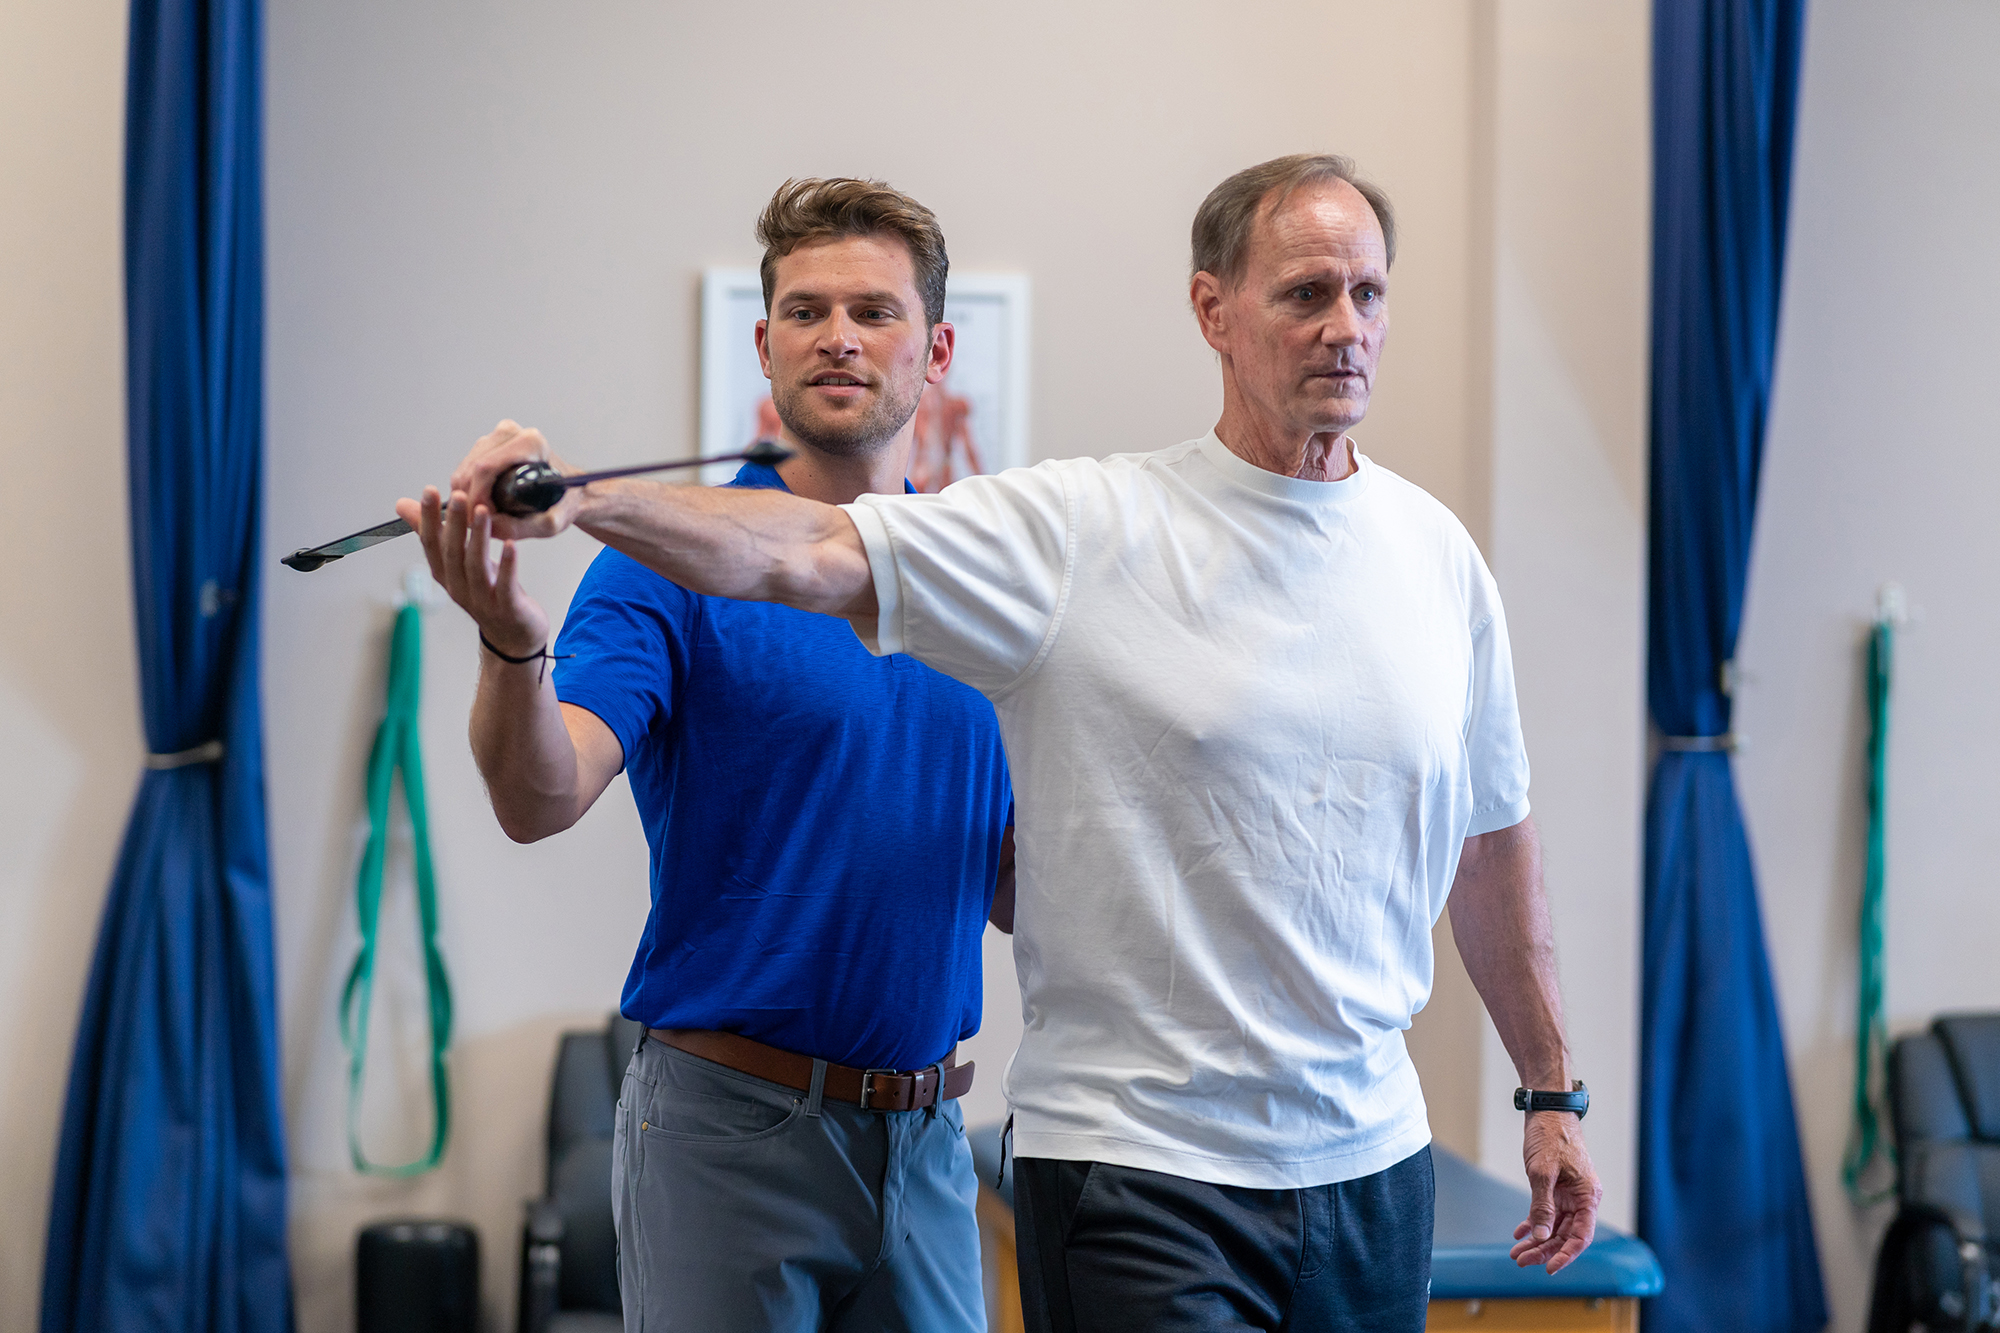 Acqucare physical therapist working with a patient on shoulder mobility